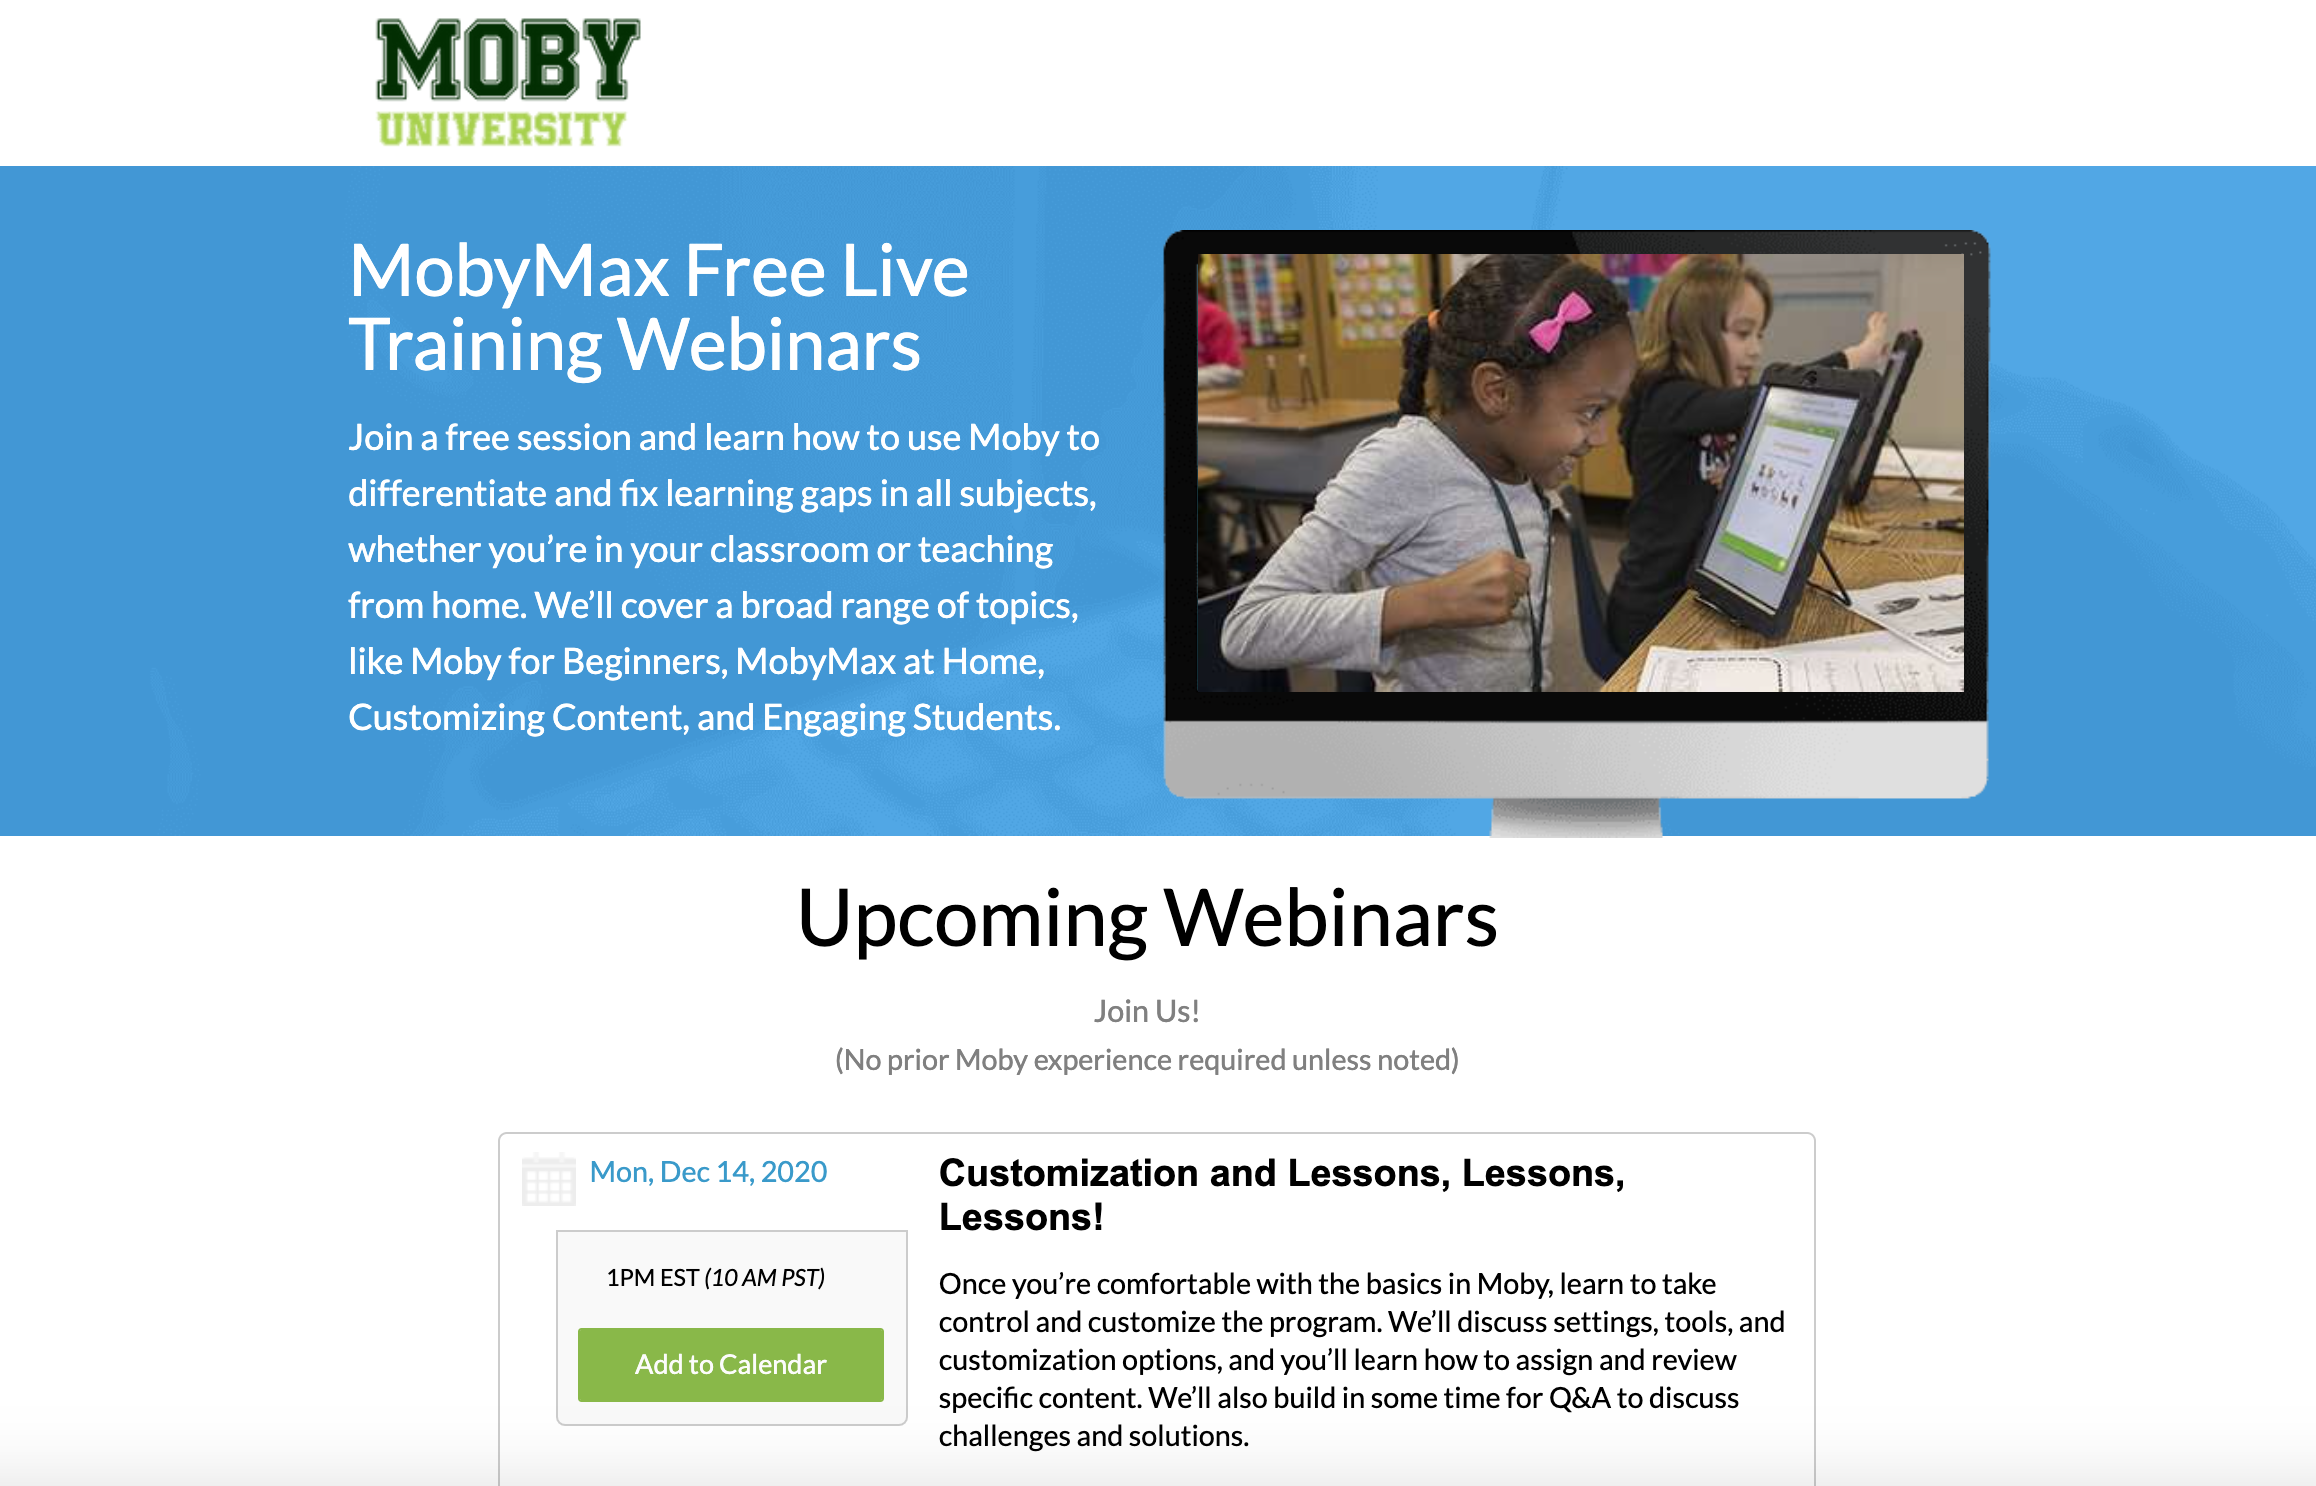 MobyMax  Close Learning Gaps